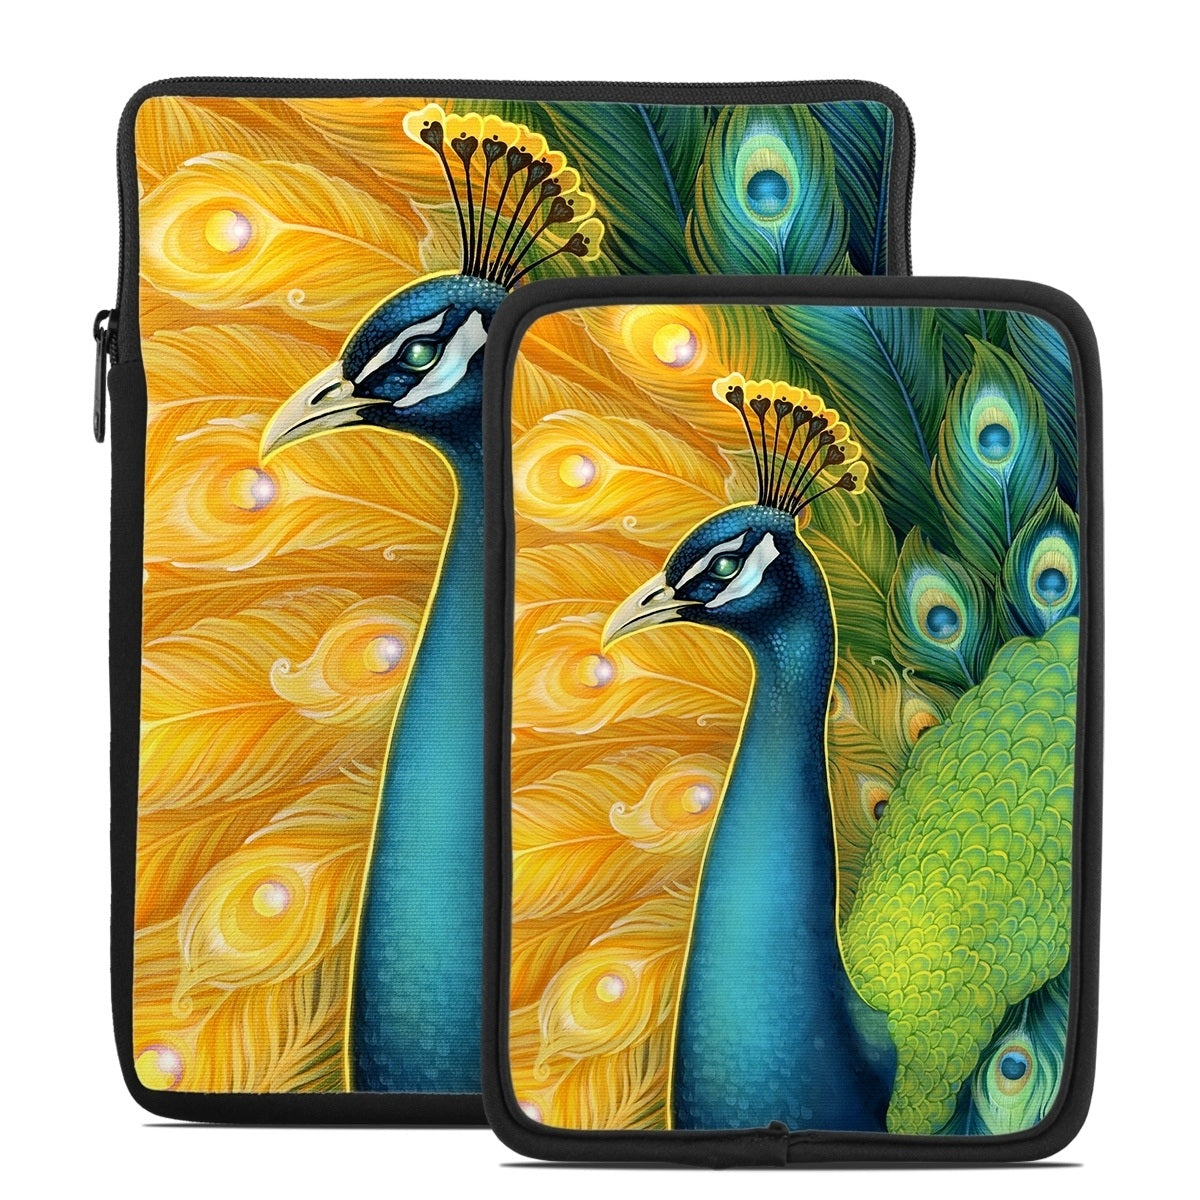 Let Go Of Old - Tablet Sleeve